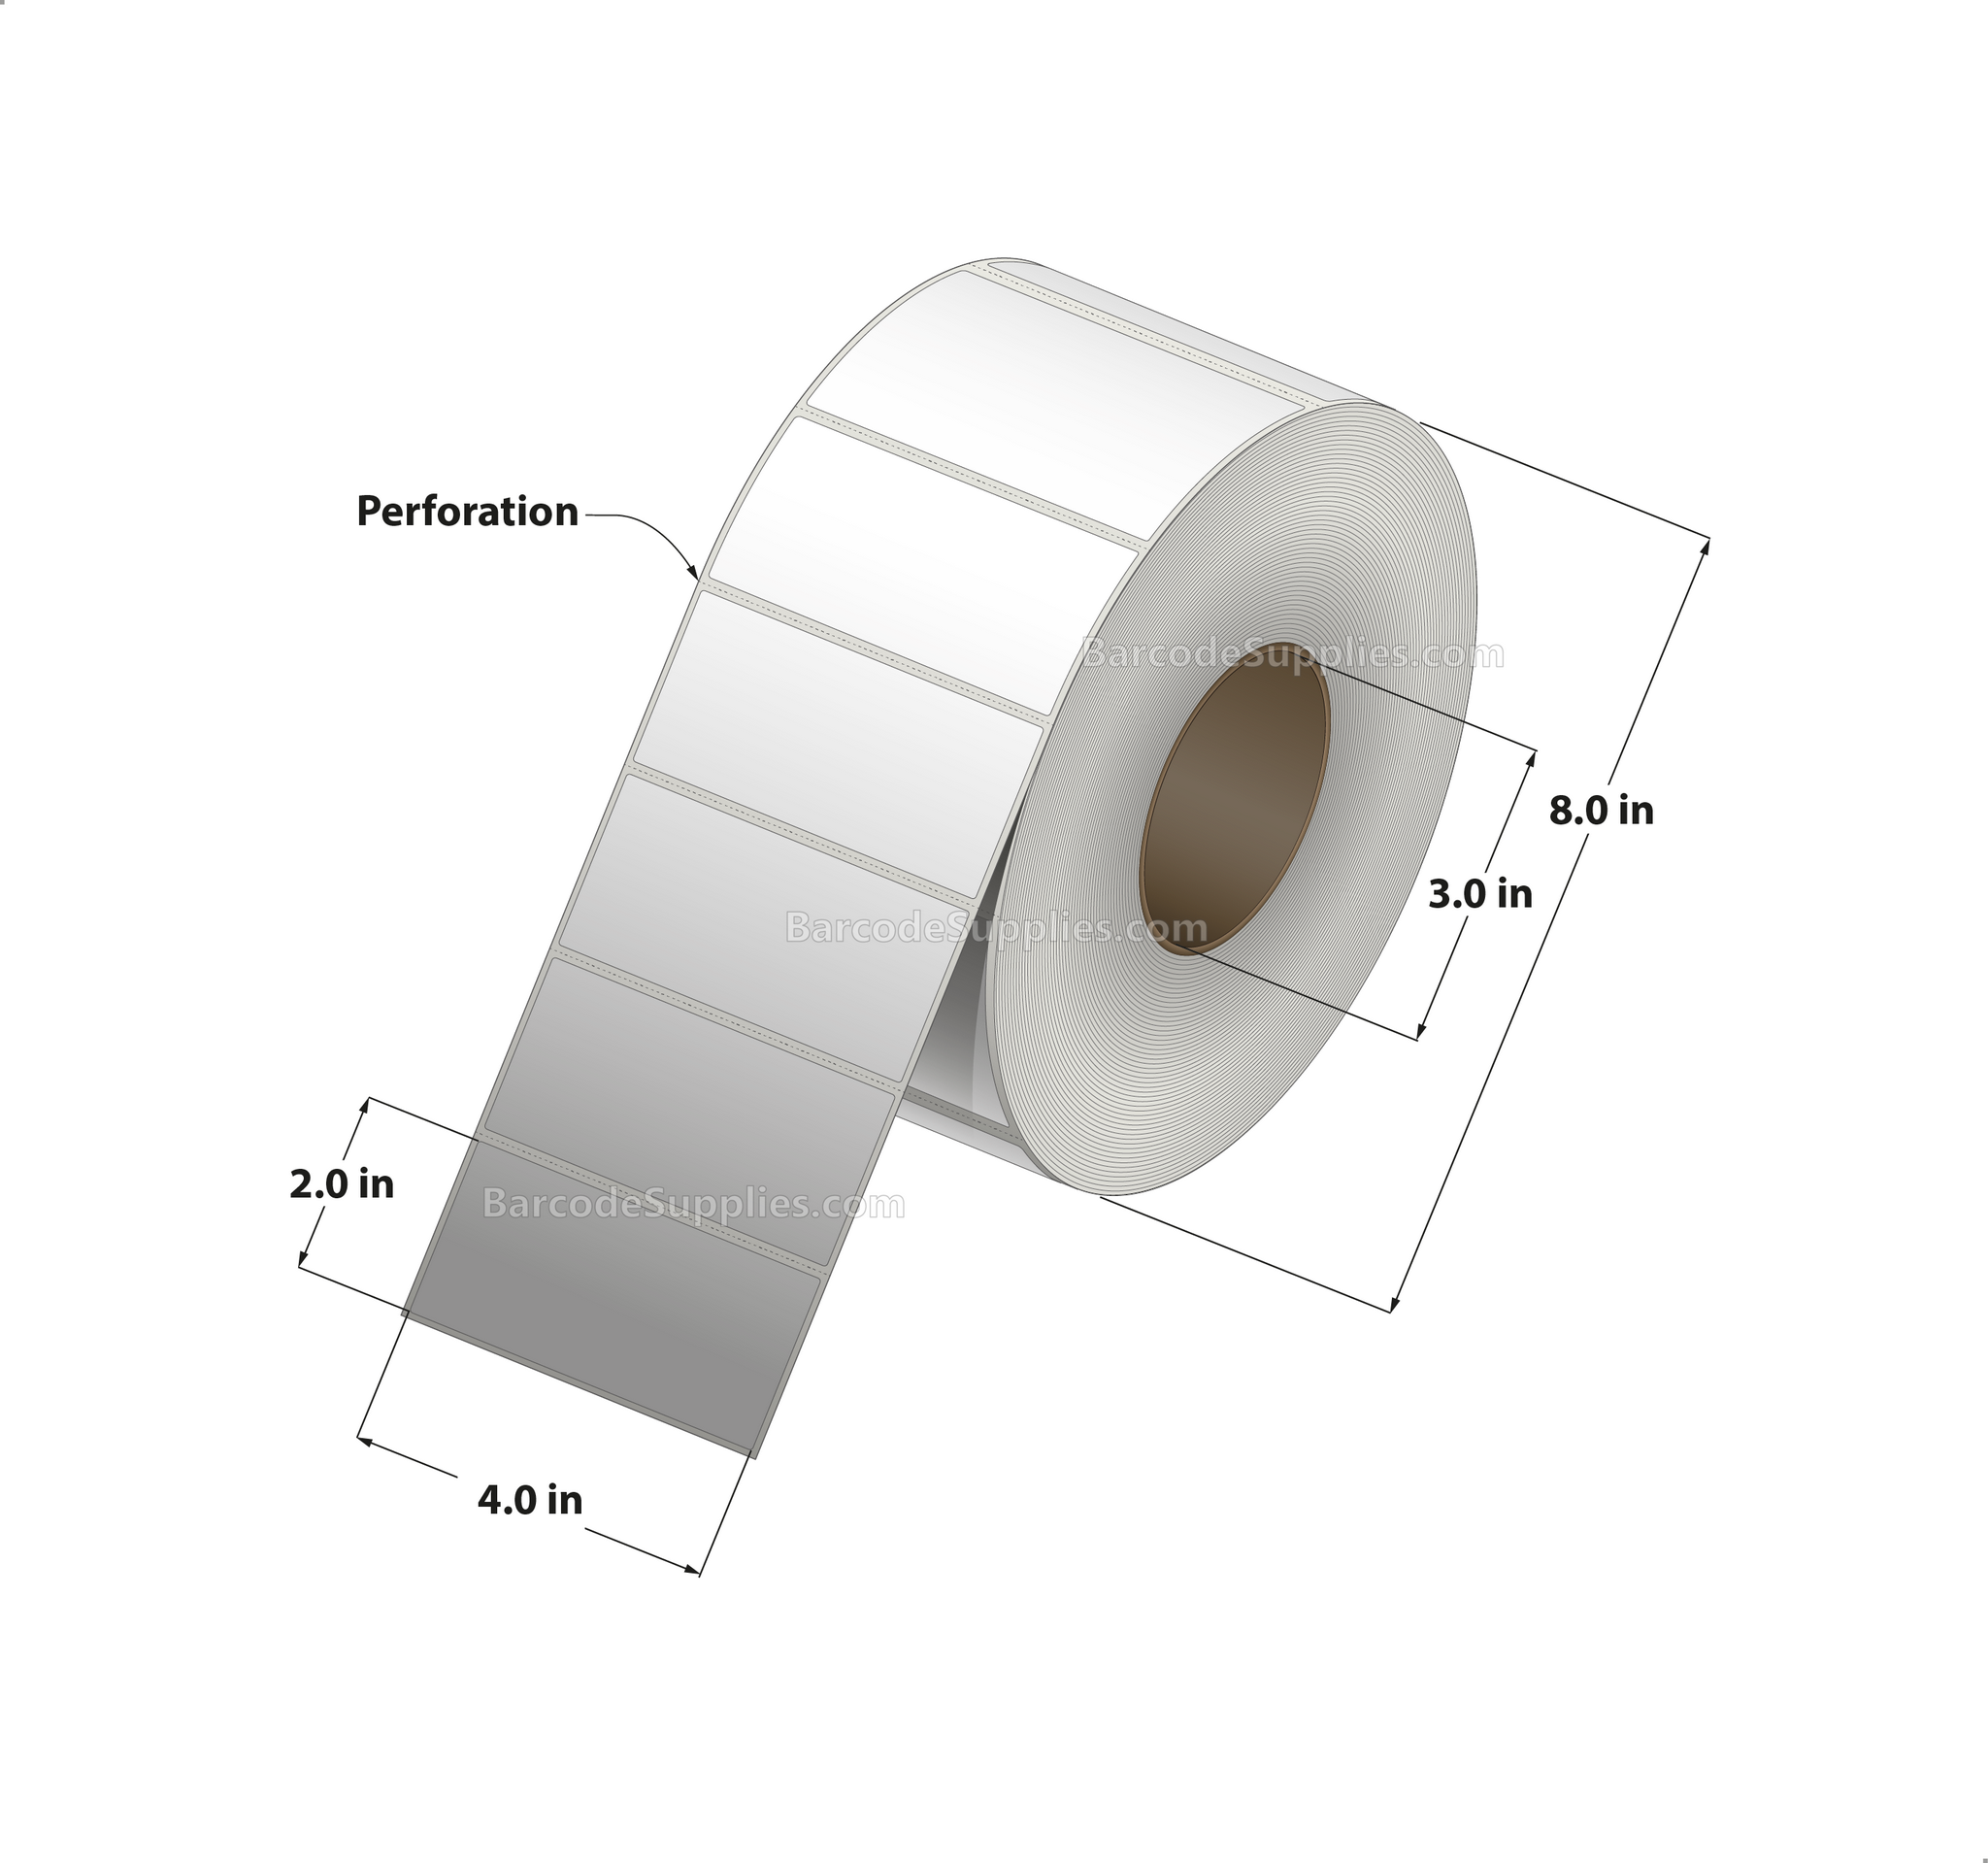 4 x 2 Thermal Transfer White Labels With Removable Adhesive - Perforated - 2900 Labels Per Roll - Carton Of 4 Rolls - 11600 Labels Total - MPN: RE-4-2-2900-3